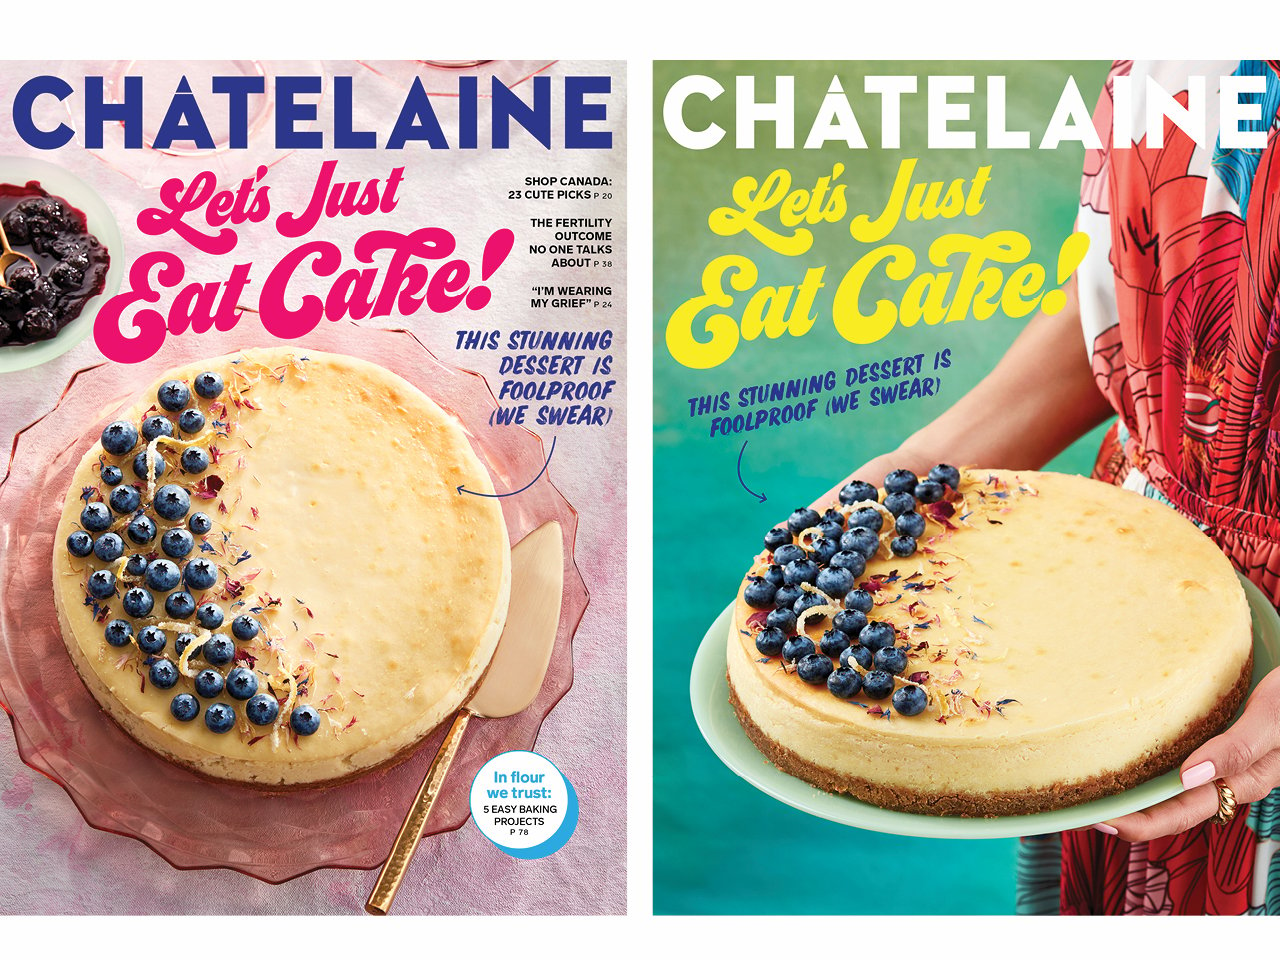 Chatelaine's May/June subscriber and newsstand covers